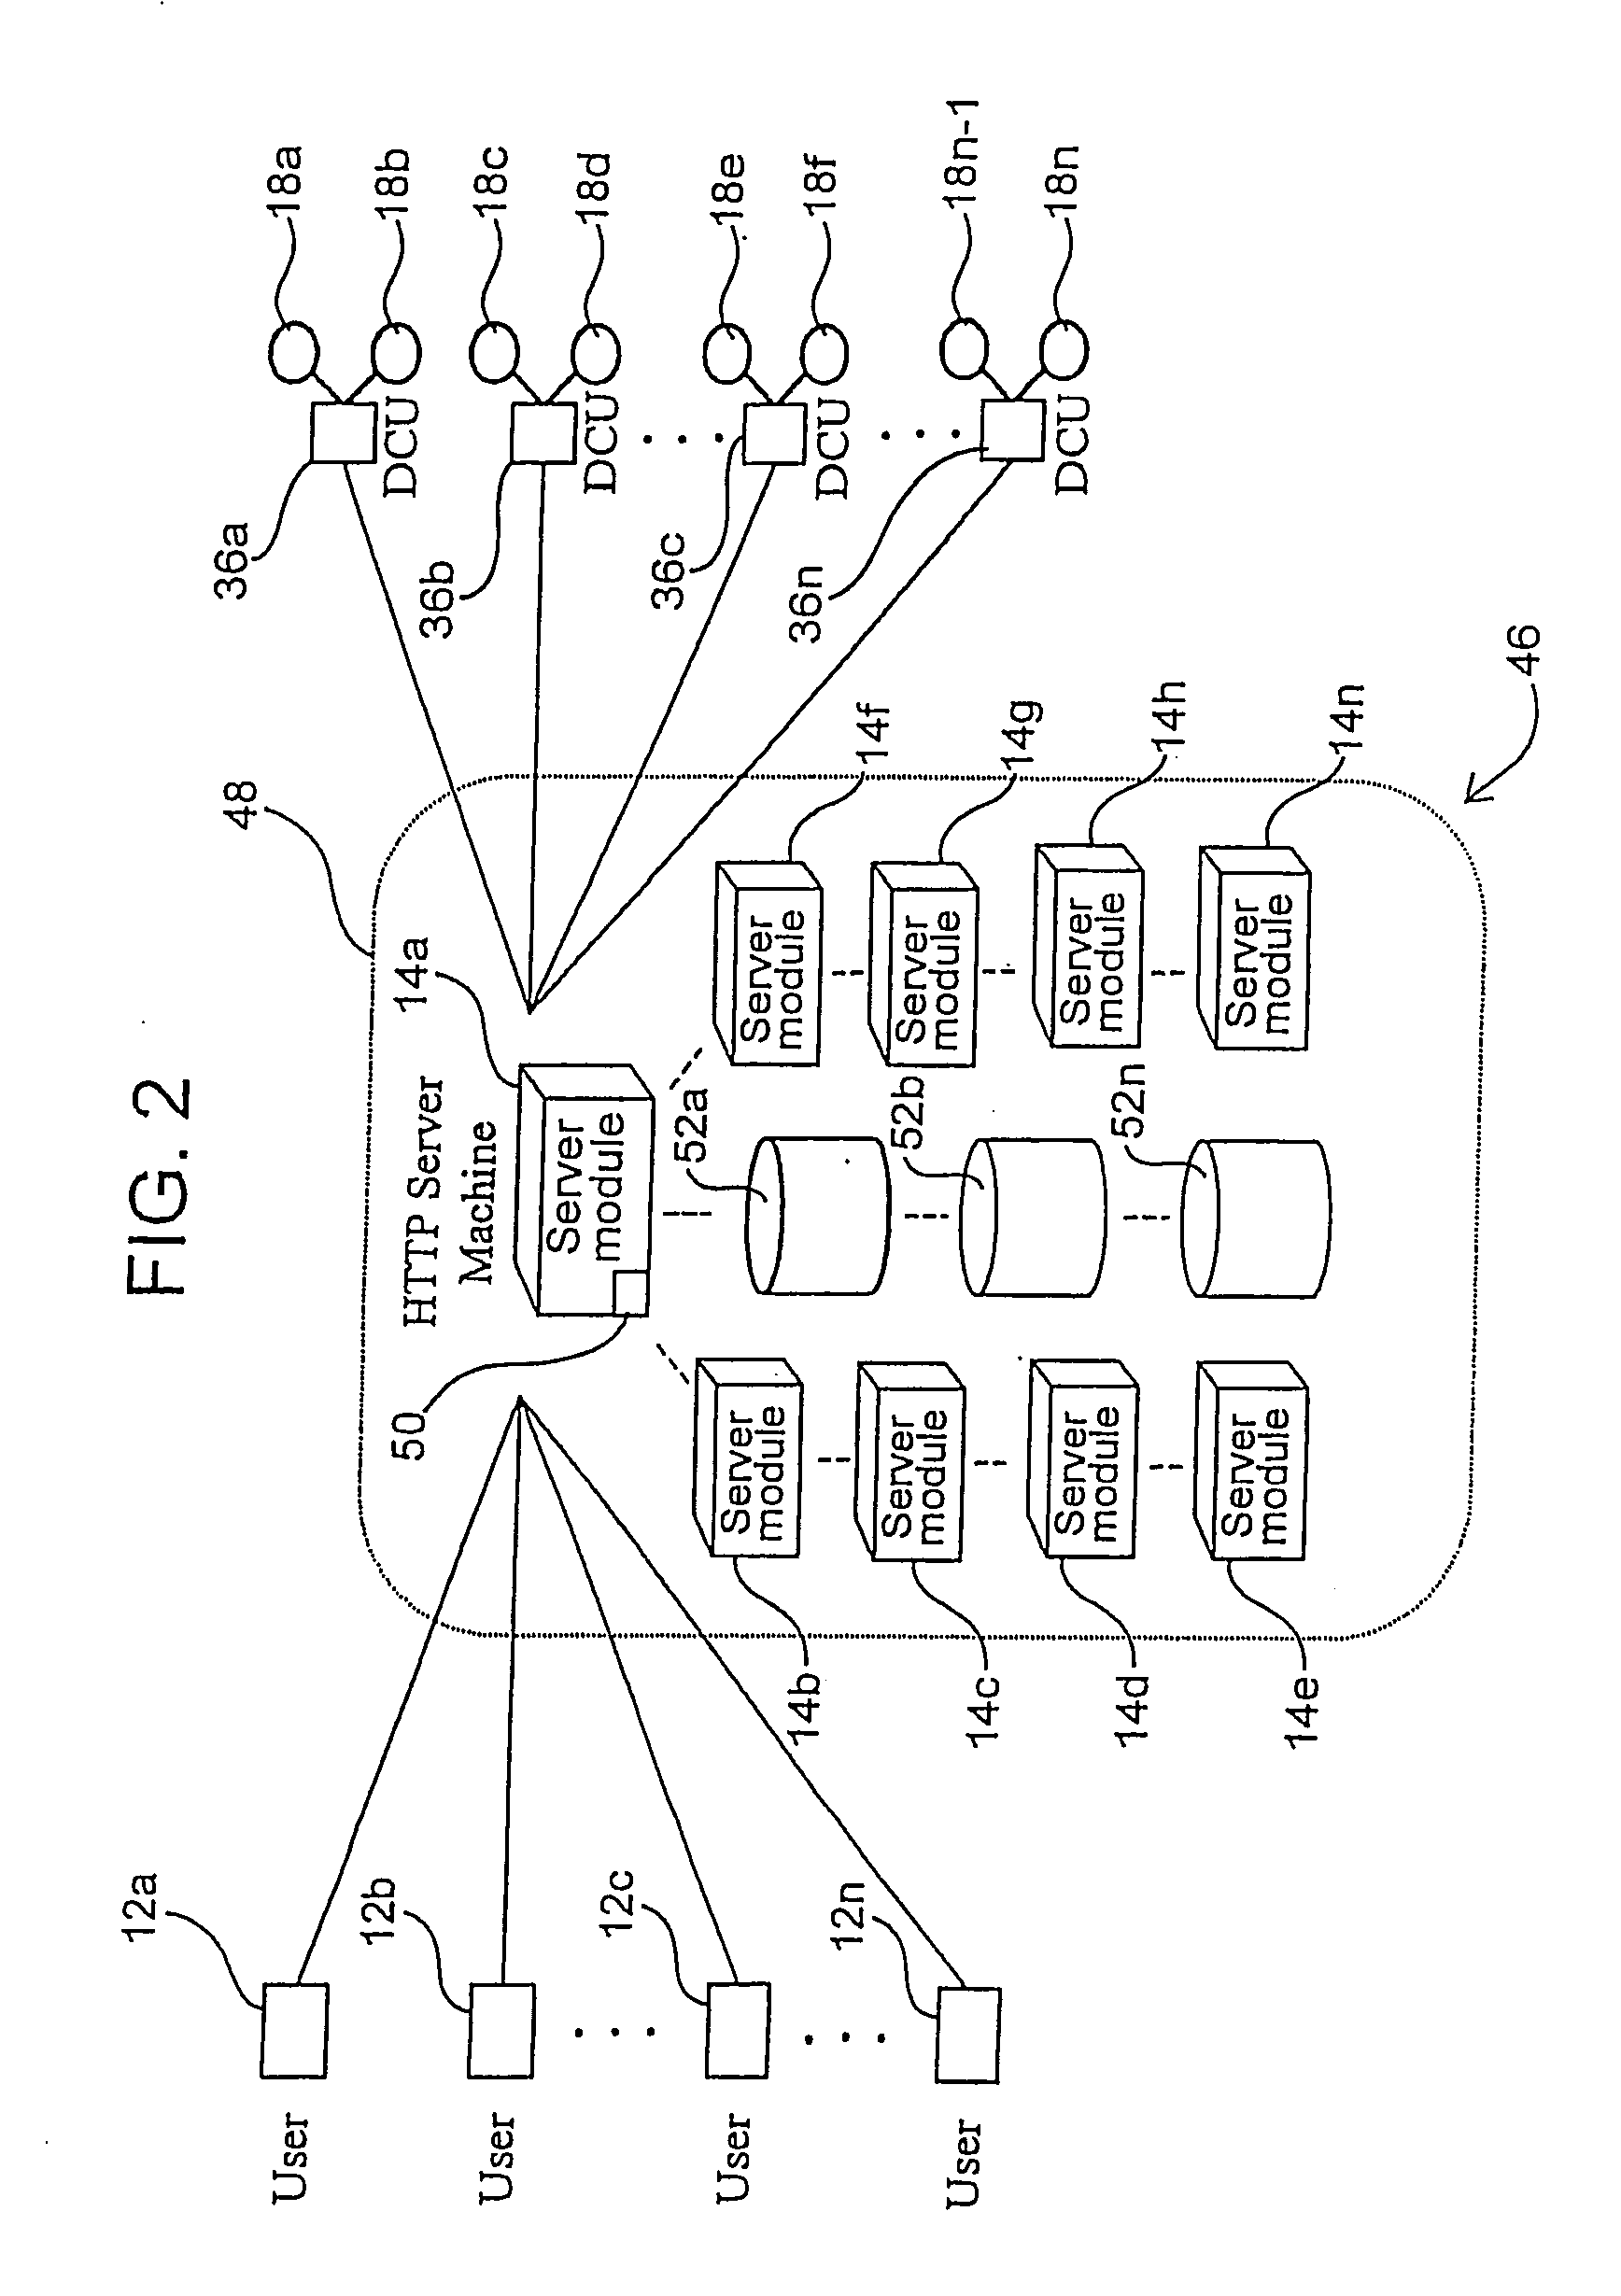 Managed peer-to-peer applications, systems and methods for distributed data access and storage